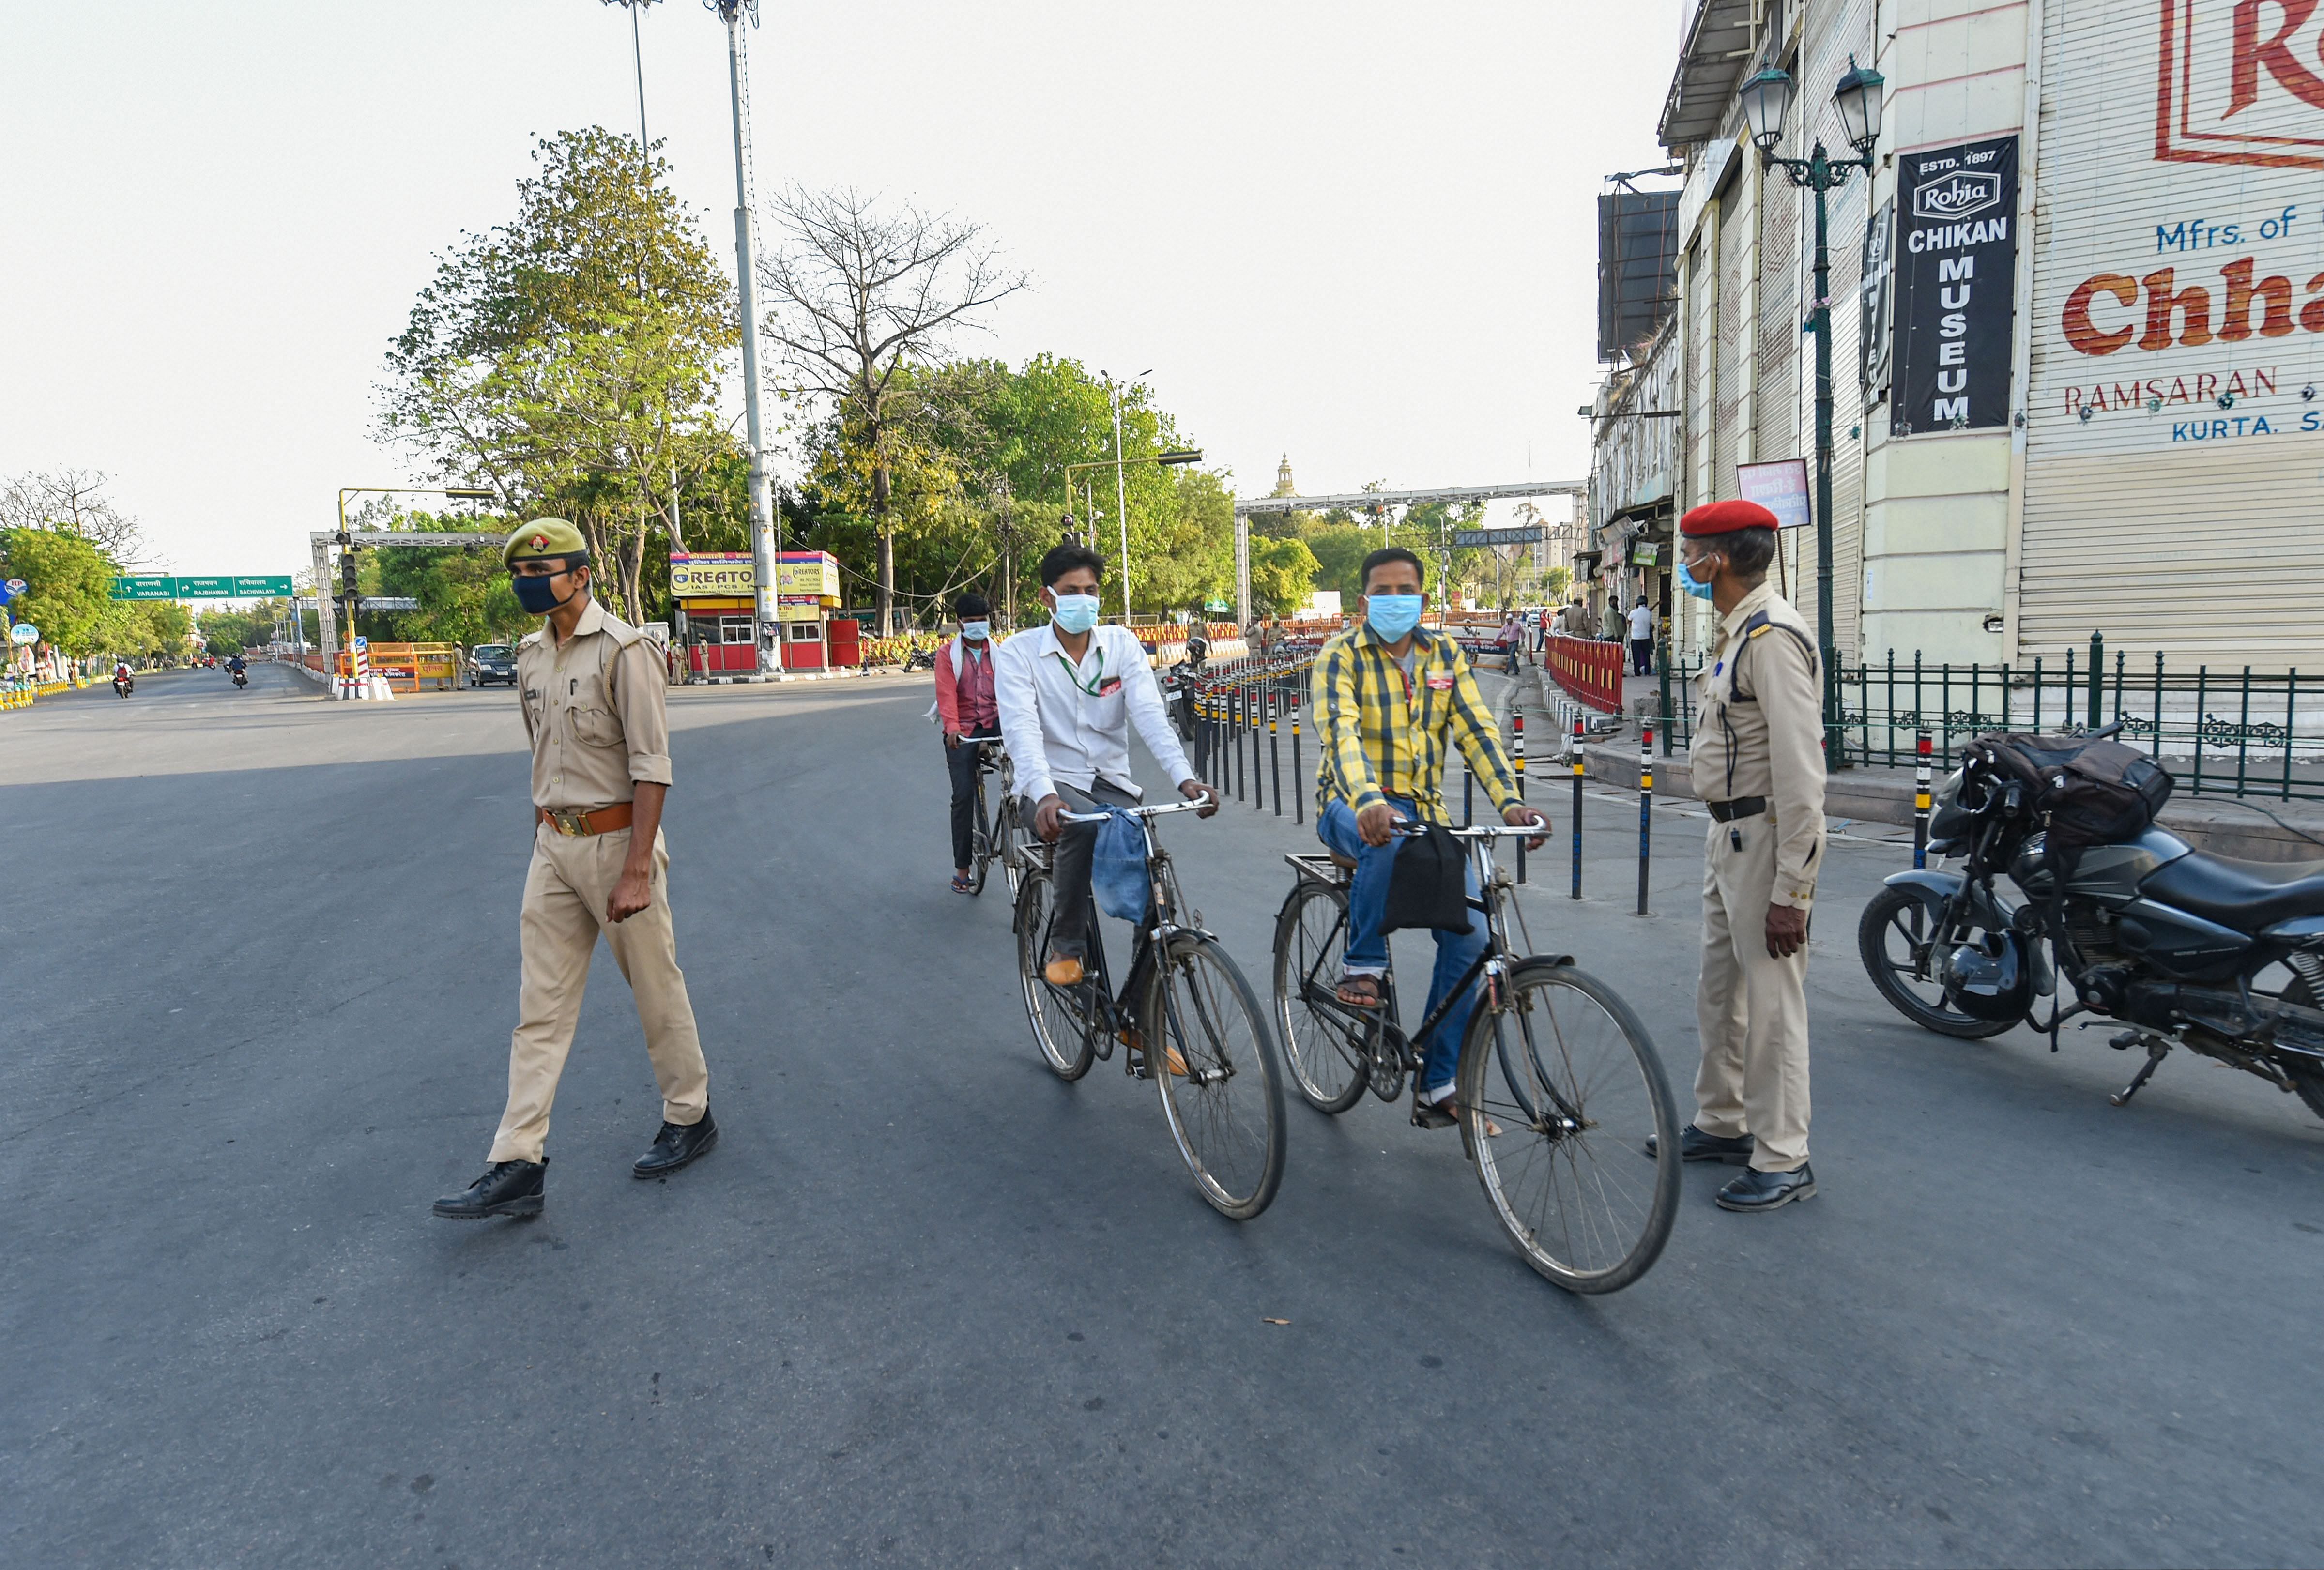  Two cyclists move past as policemen stand guard during the nationwide coronavirus lockdown, in Lucknow. (Credit: PTI Photo)